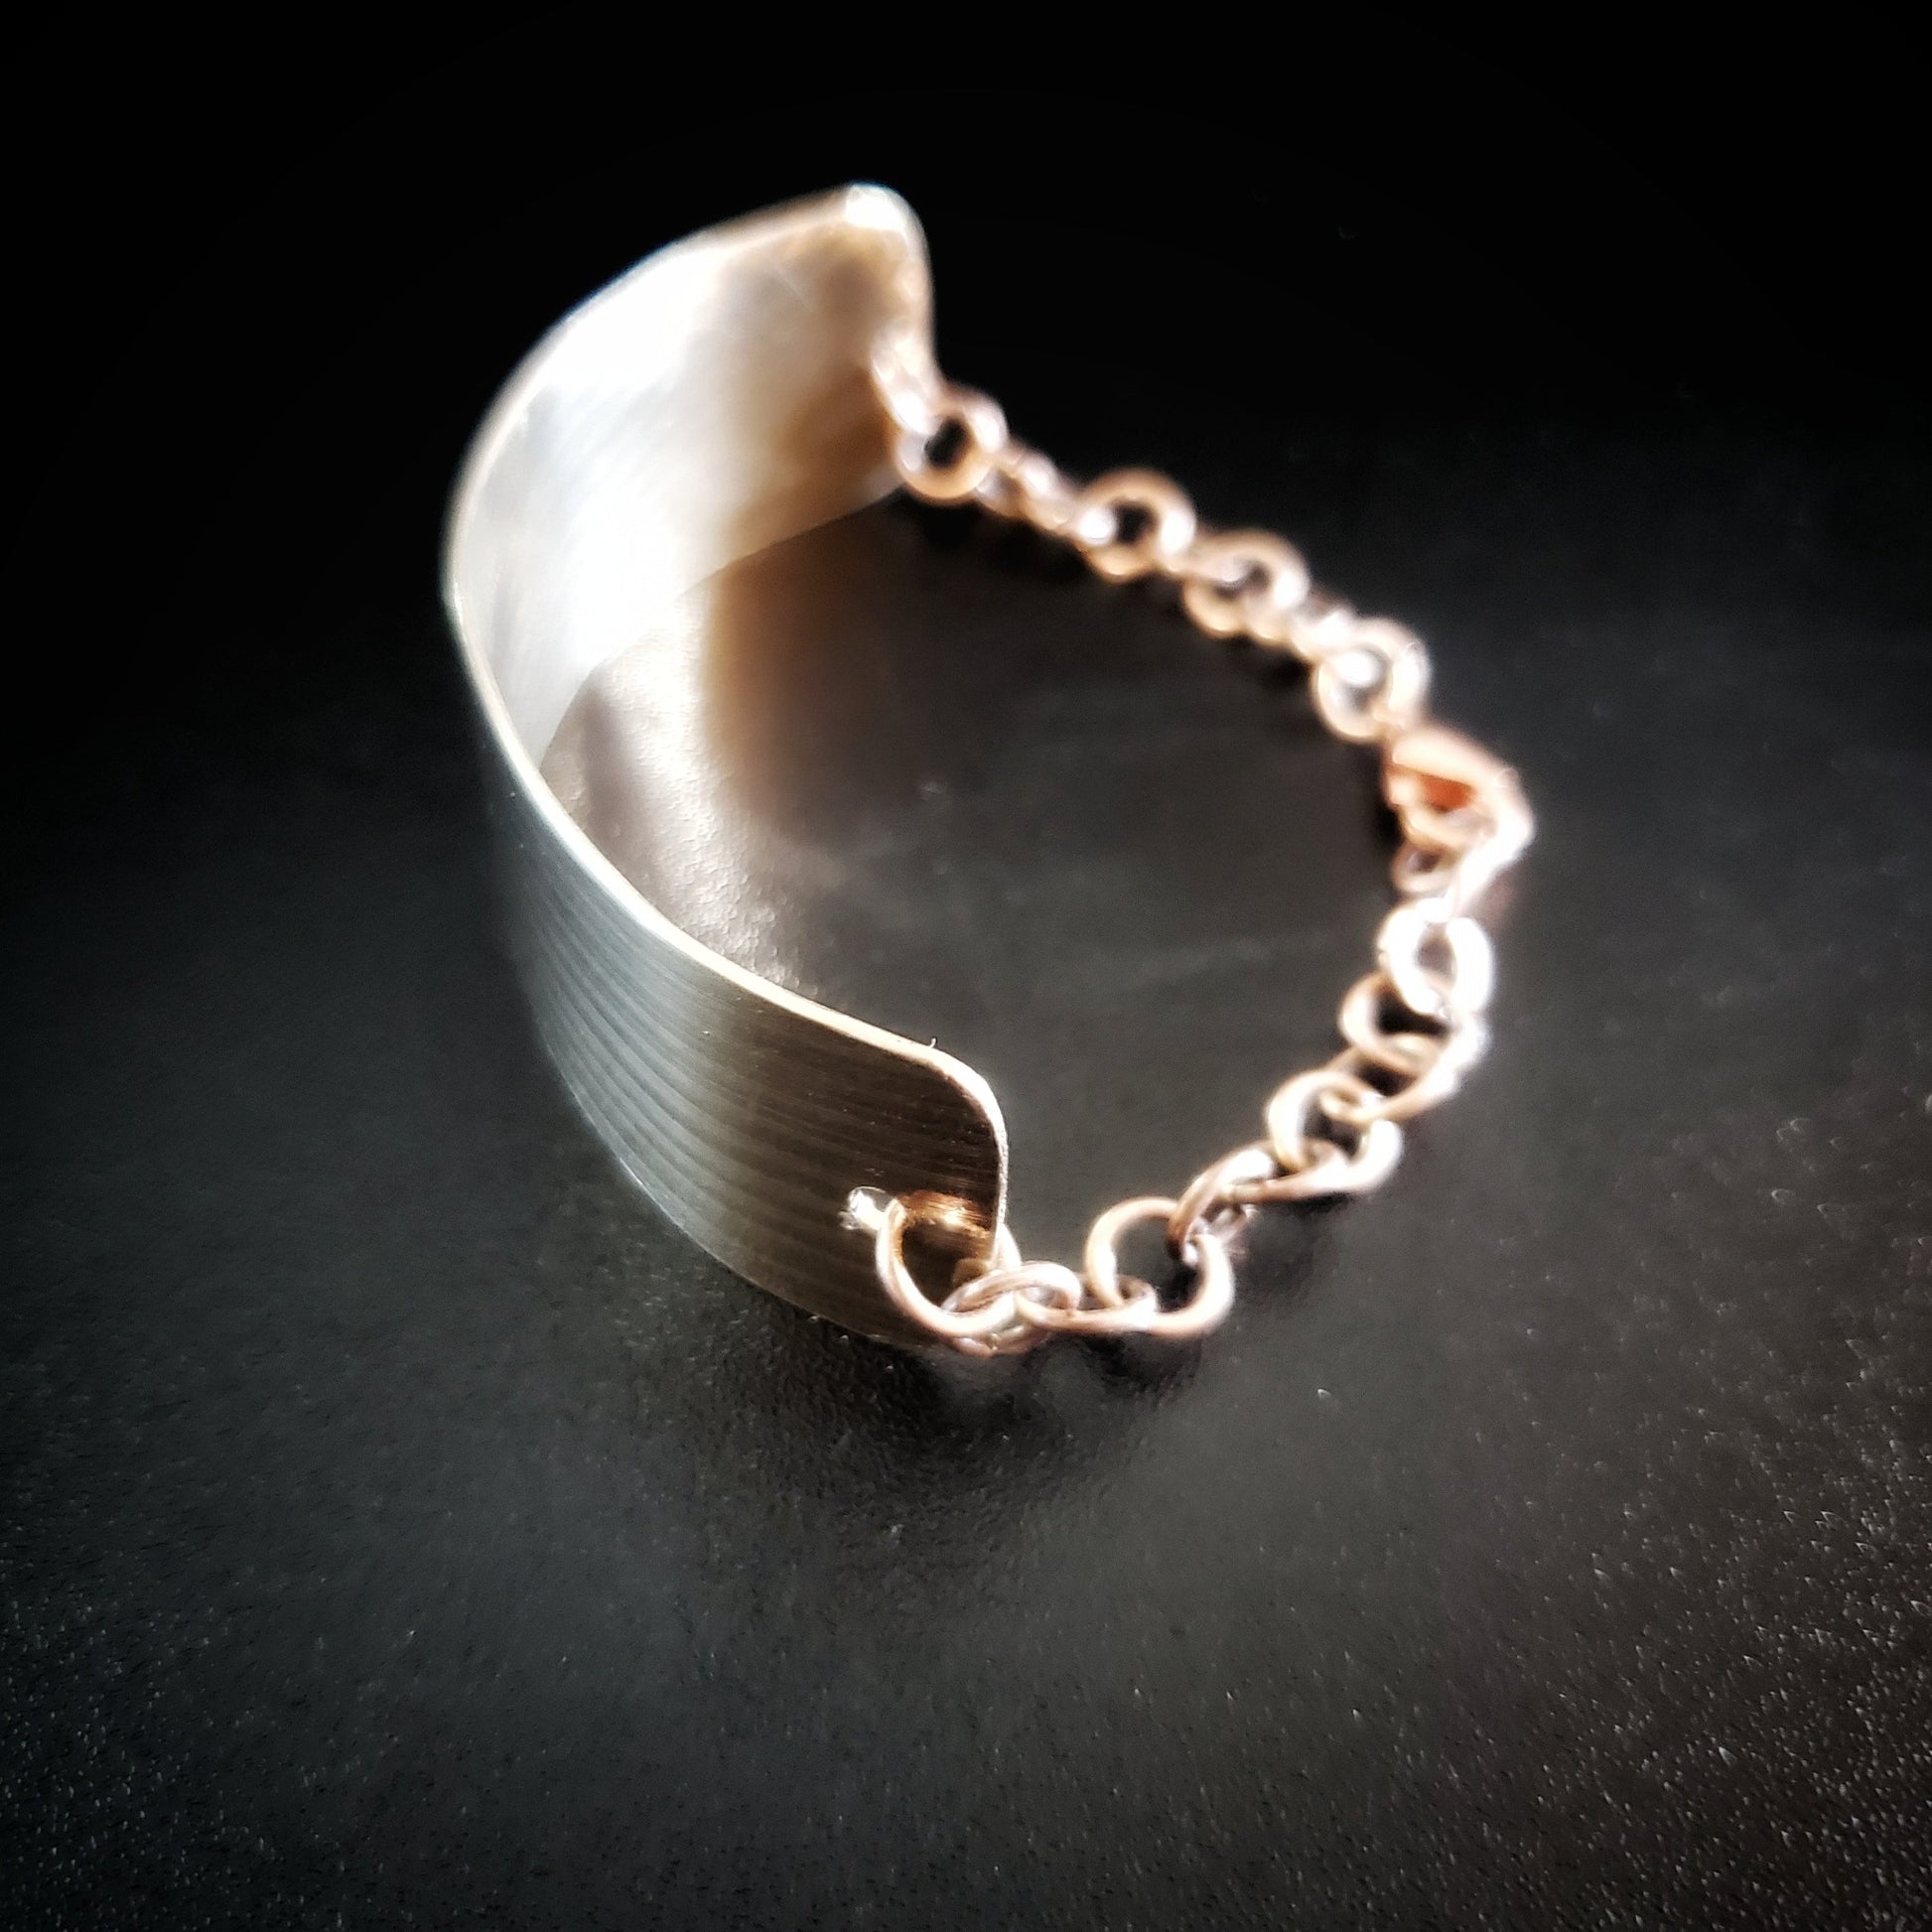 bracelet made from a rectangular piece of upcycled cymbal and copper coloured chain - black background